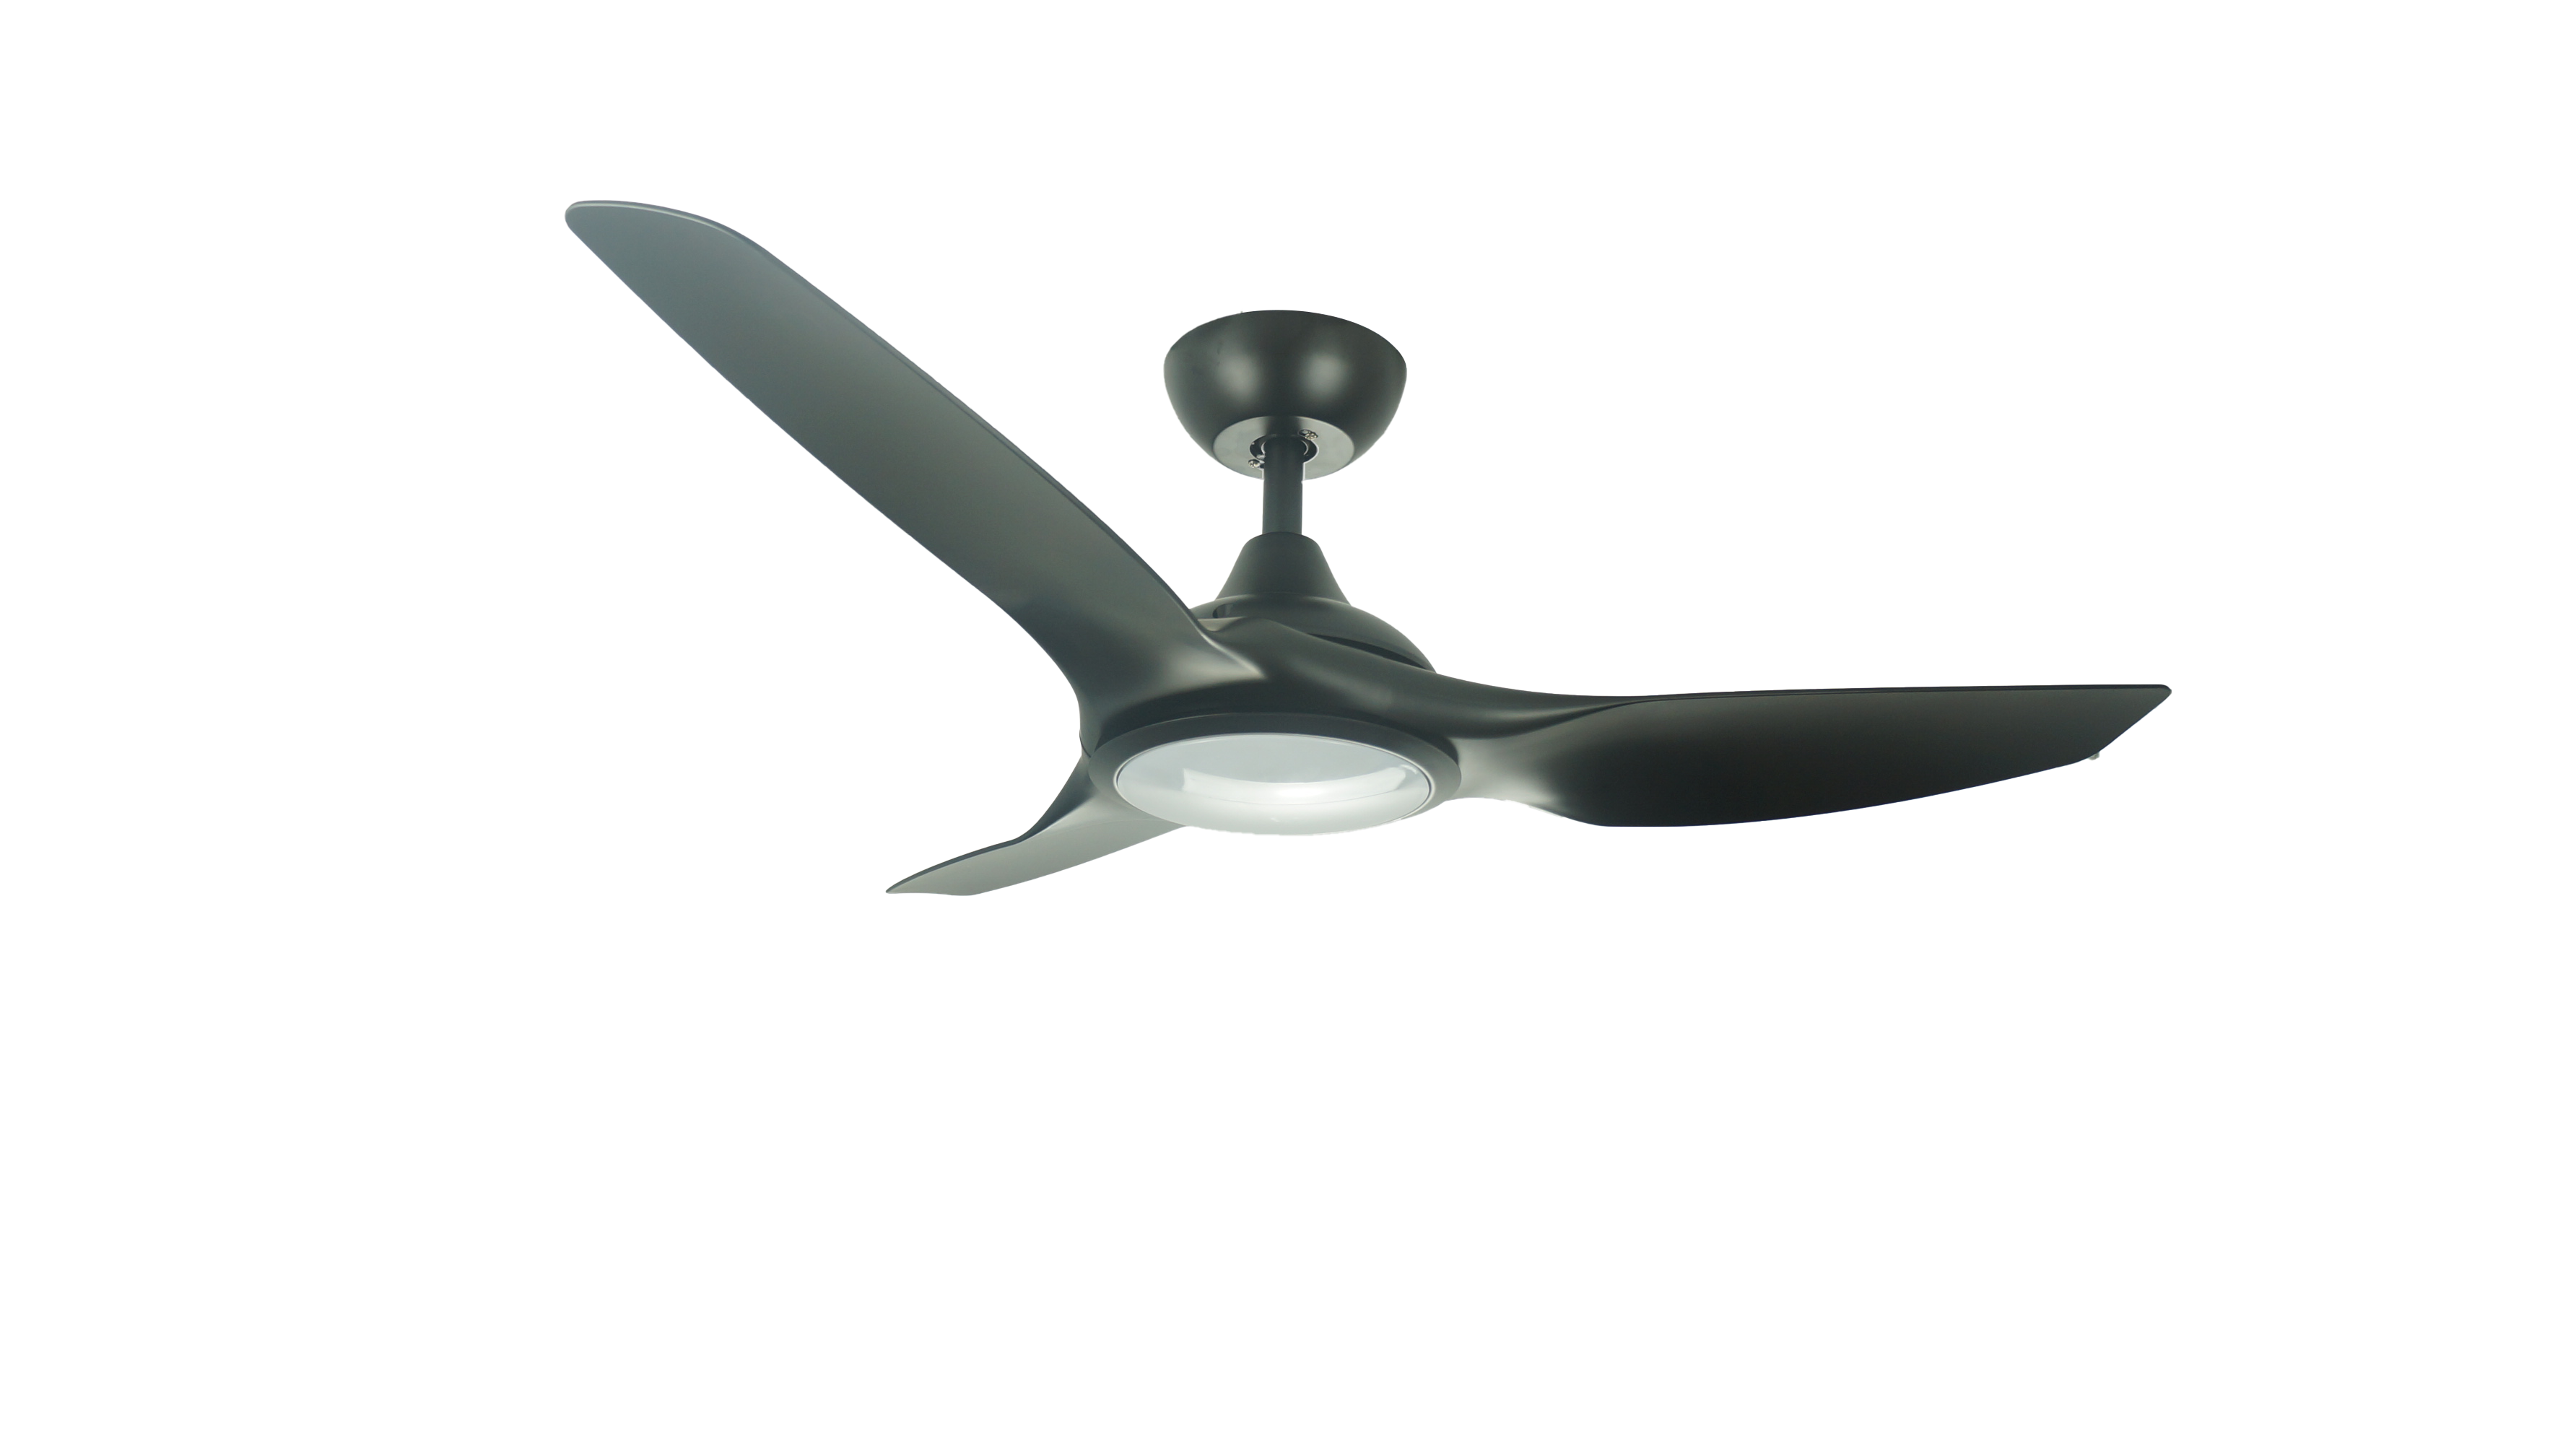 Airbena Ceiling Ceiling Fan 40 "ABS Fan Blade with And without Light for Household Ceiling Fans